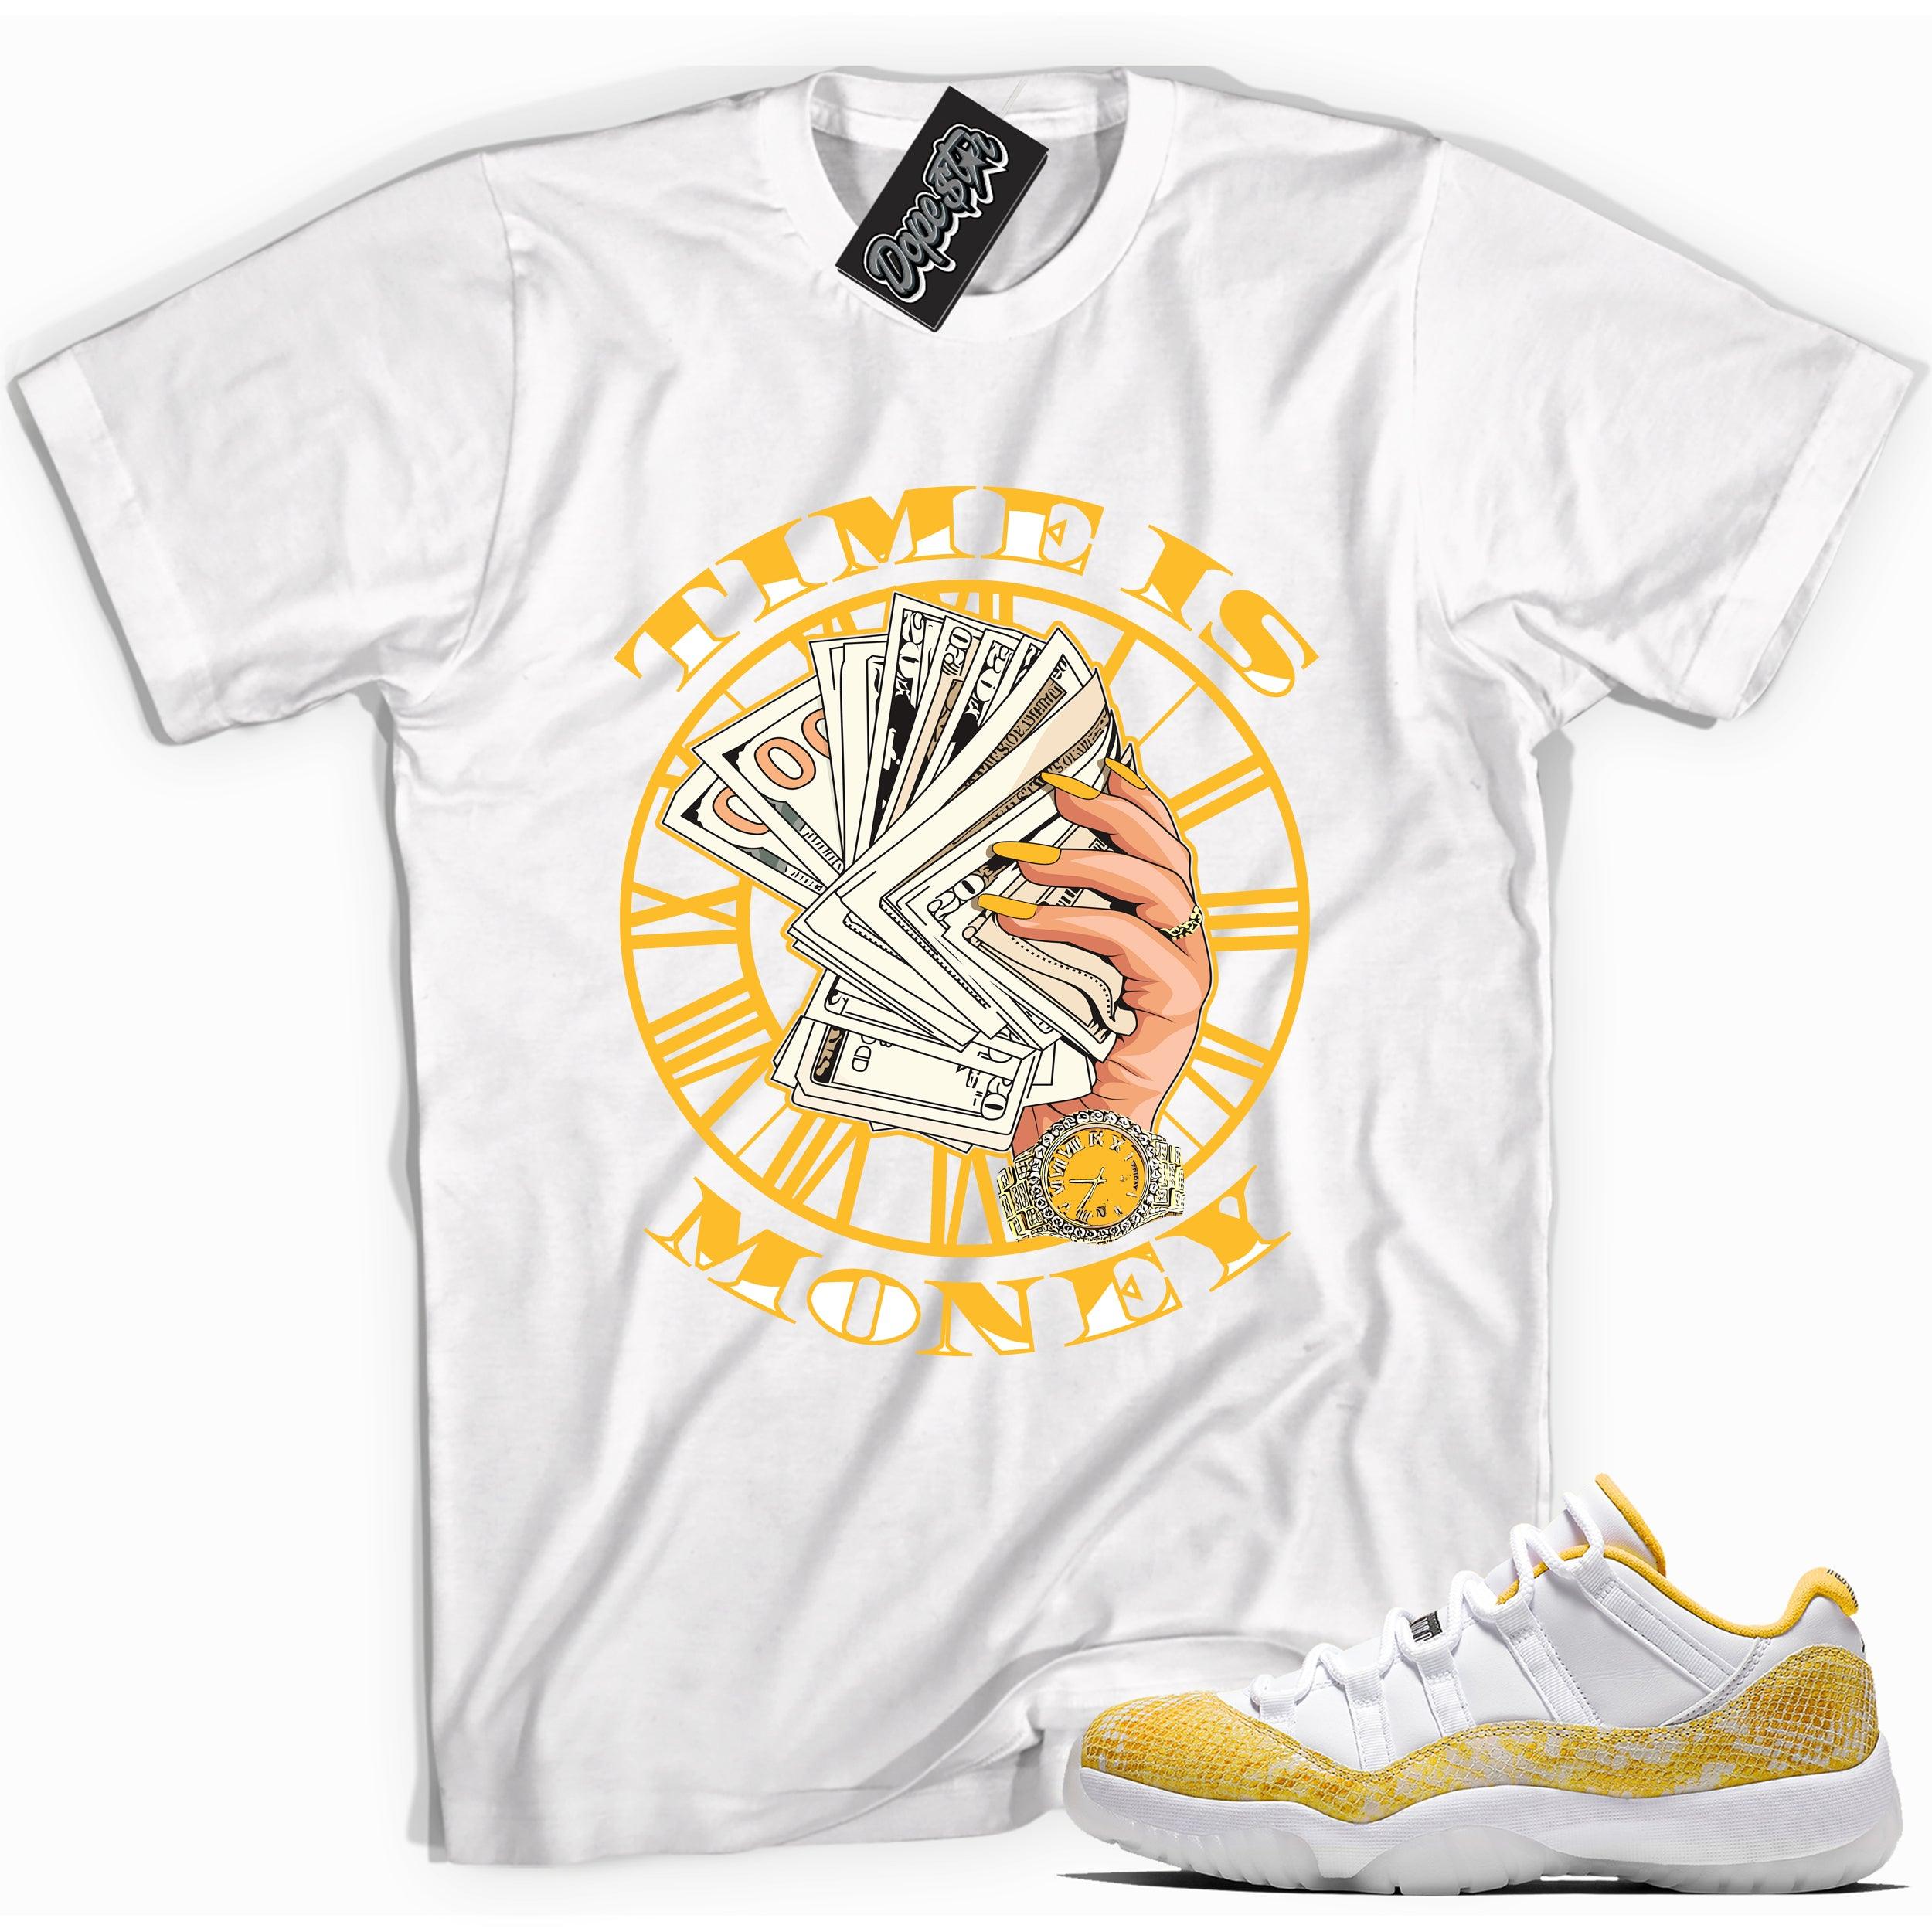 Cool white  graphic tee with 'Time Is Money' print, that perfectly matches Air Jordan 11 Retro Low Yellow Snakeskin sneakers